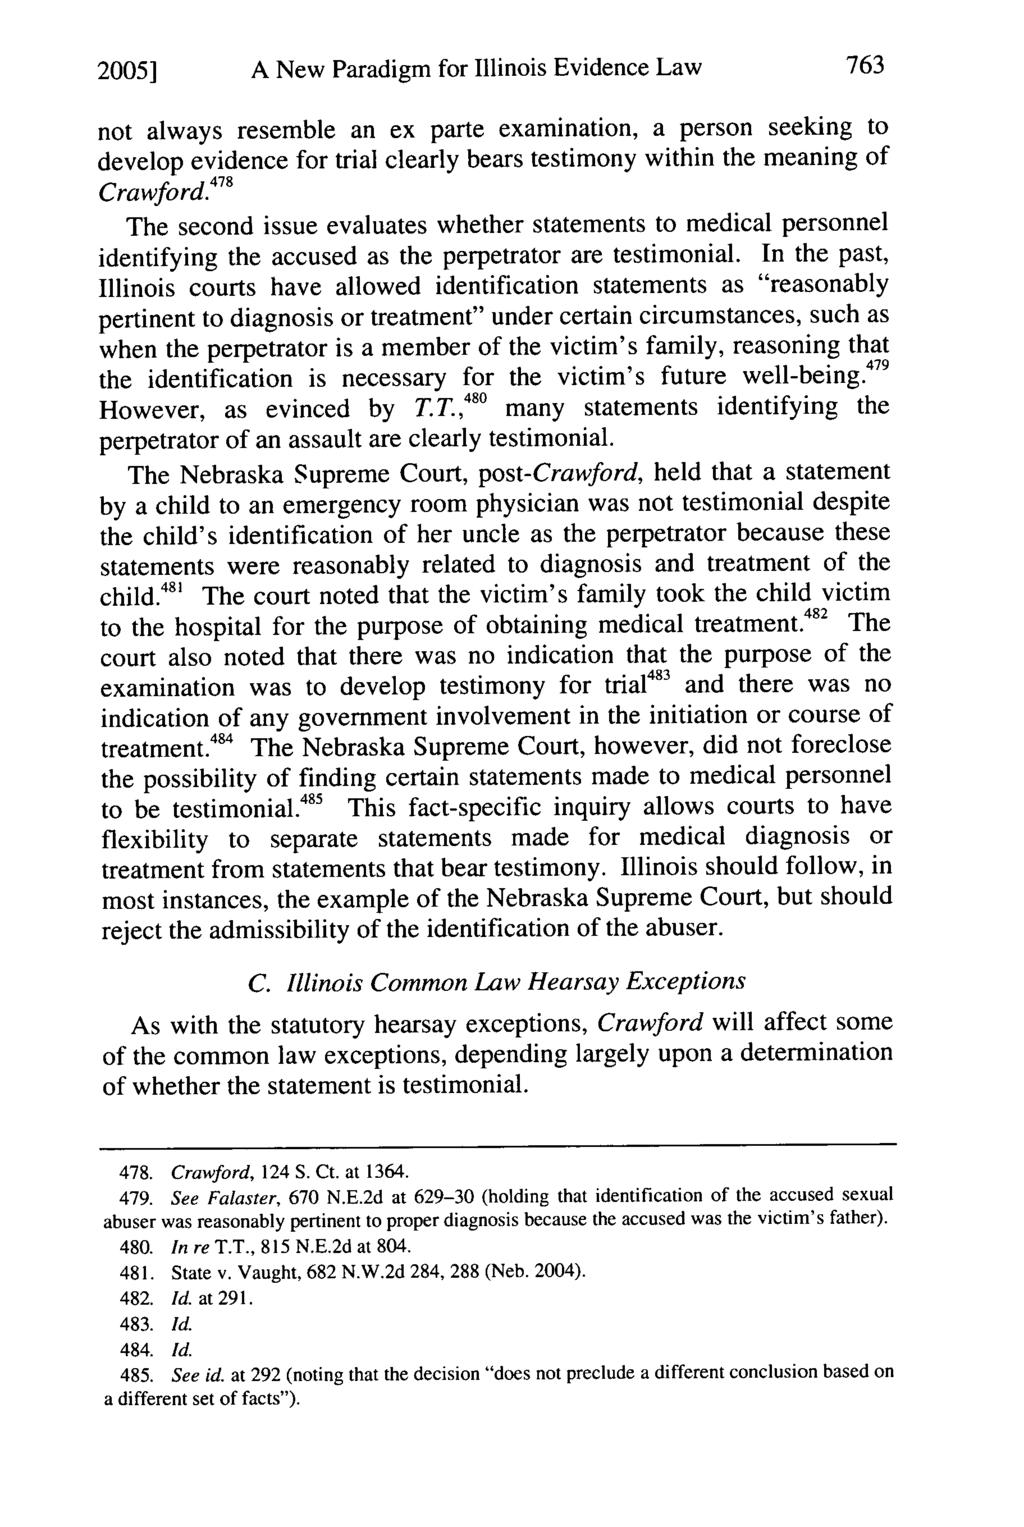 2005] A New Paradigm for Illinois Evidence Law not always resemble an ex parte examination, a person seeking to develop evidence for trial clearly bears testimony within the meaning of Craw ford.